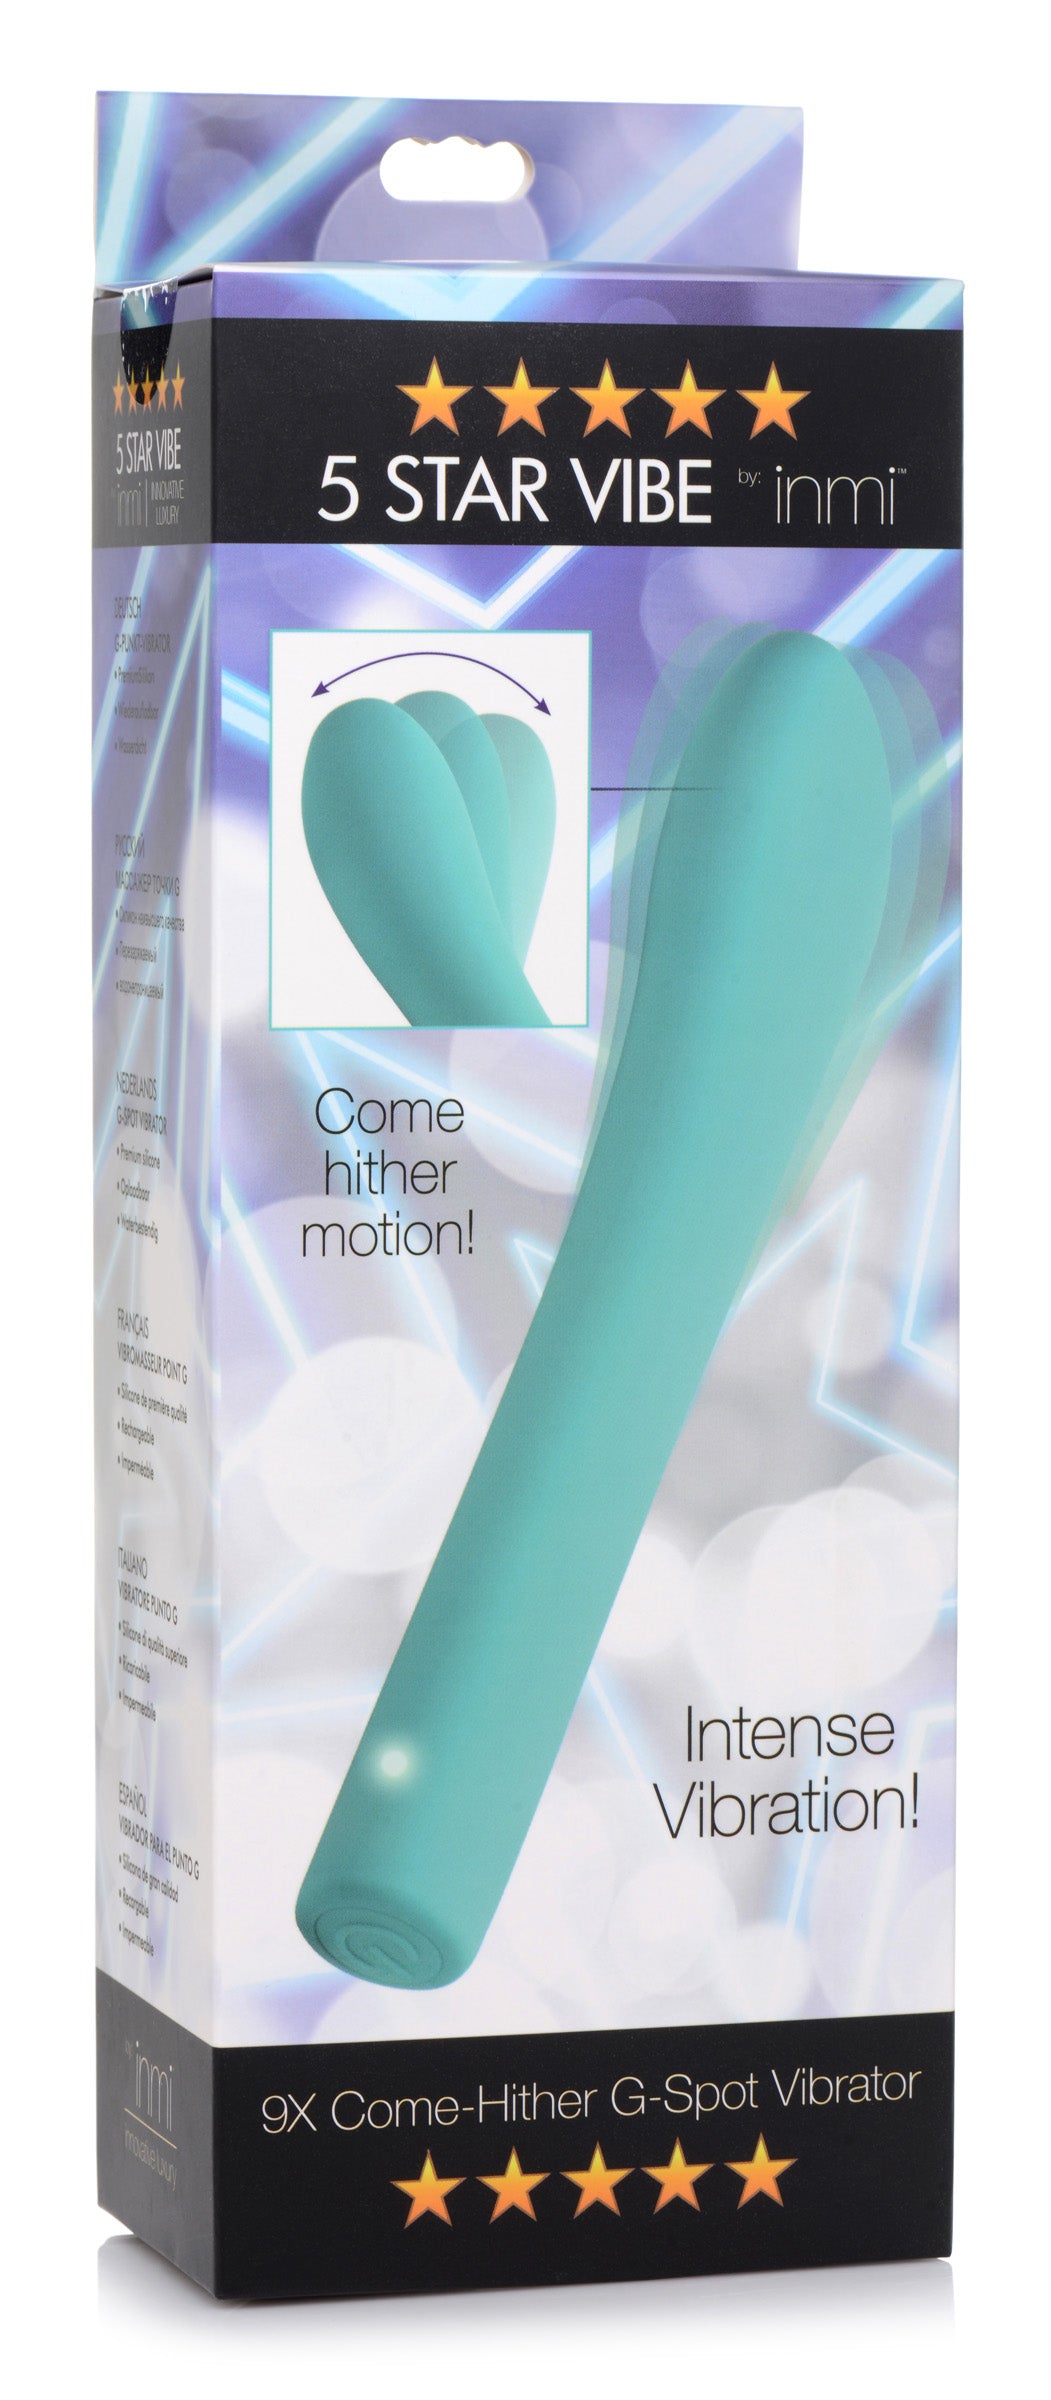 5 Star 9X Come-Hither G-Spot Silicone Vibrator - Teal - UABDSM